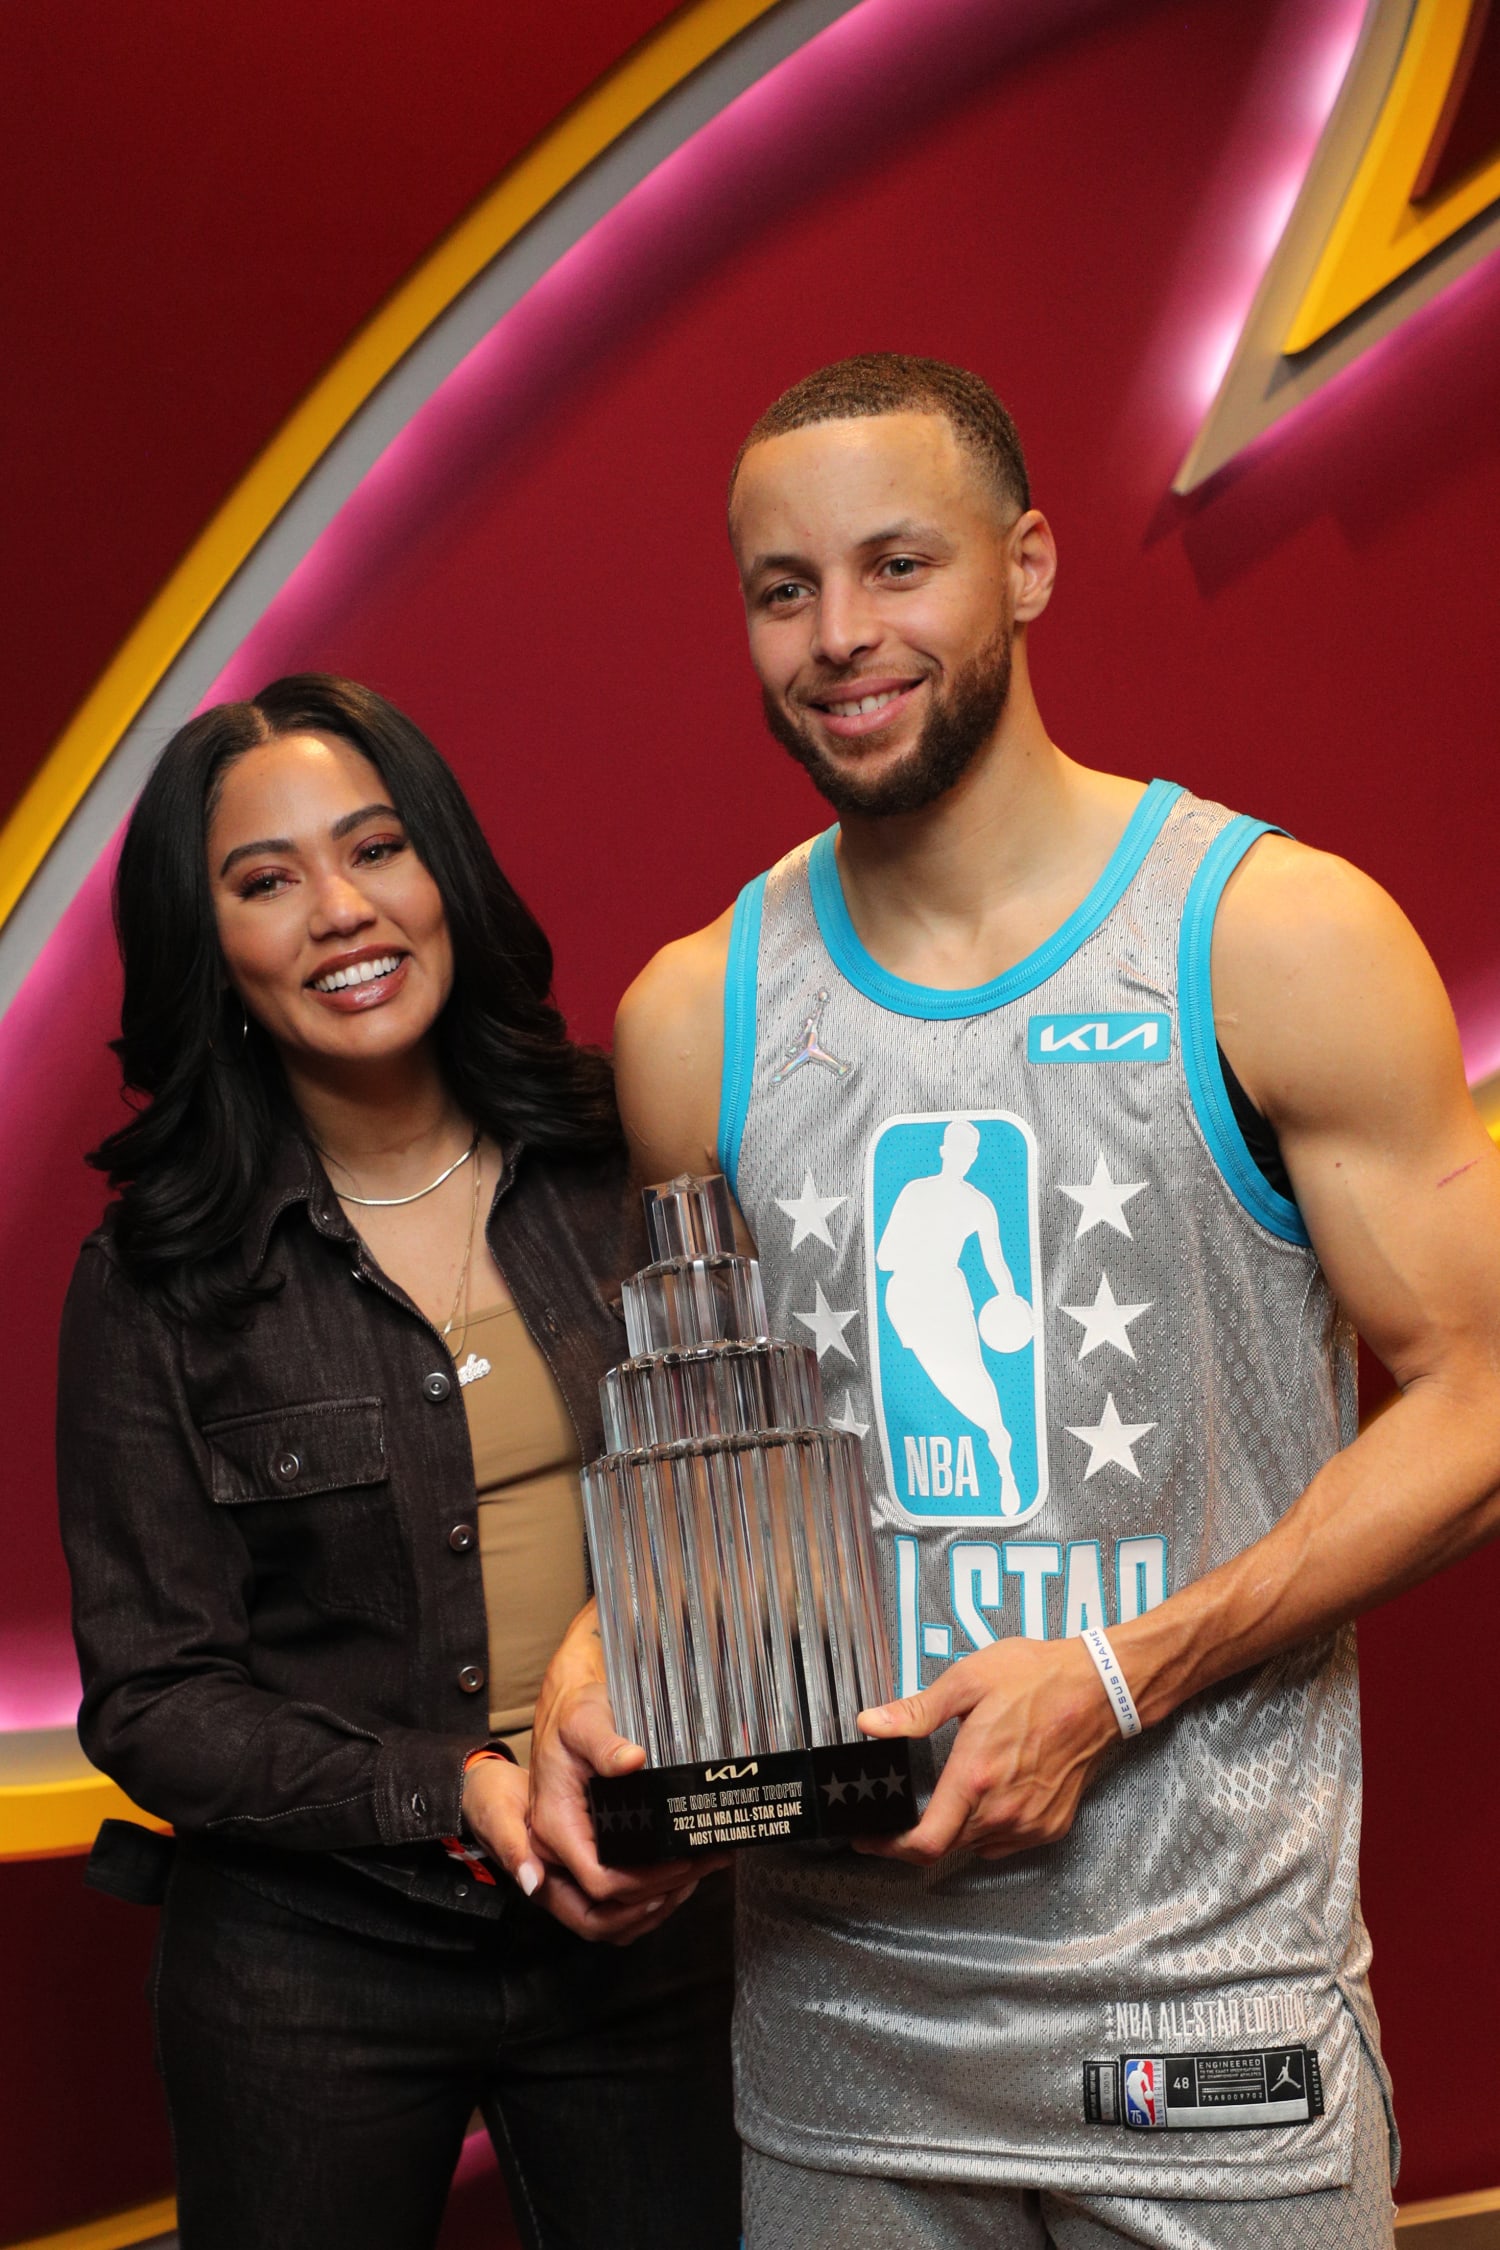 Steph Curry Wears Clever Shirt to Defend Wife Ayesha Curry After Boston Bar  Trolled Her Cooking